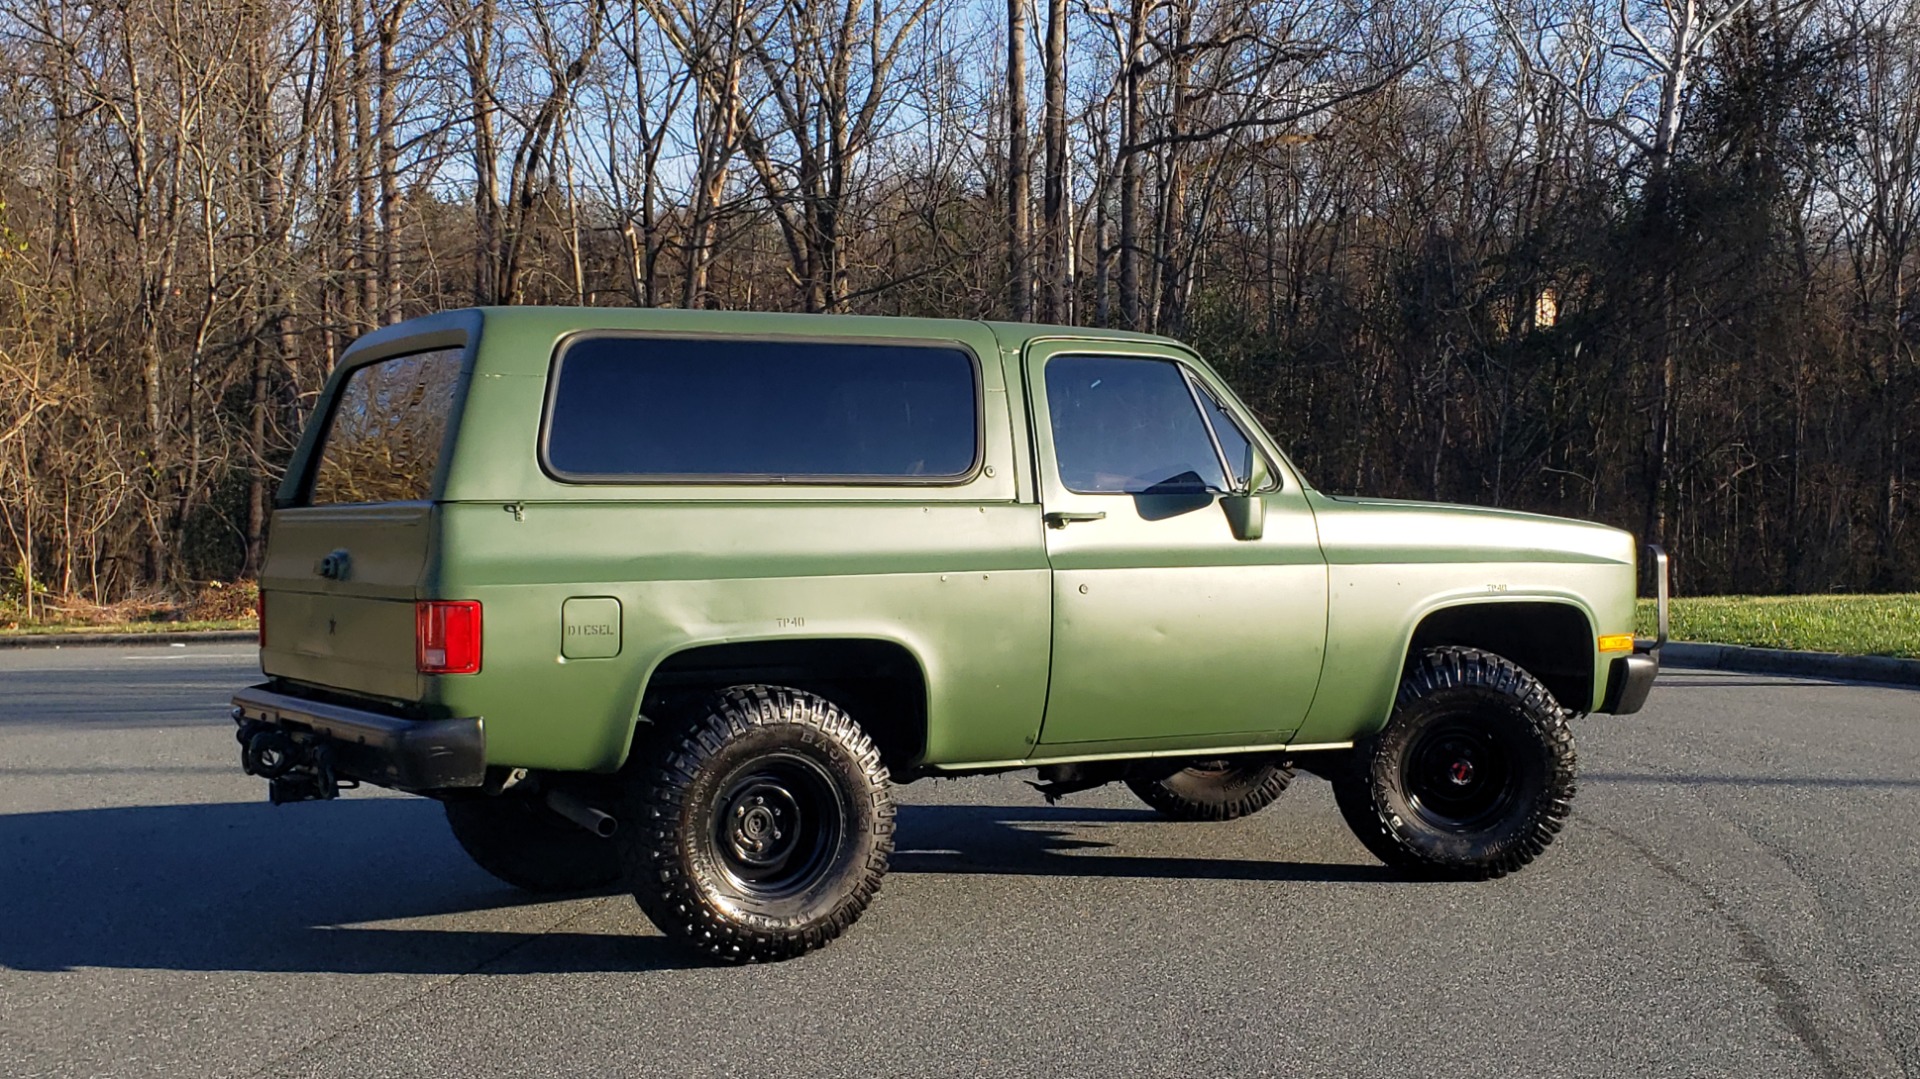 Used 1985 Chevrolet BLAZER D10 MILITARY SUV / 4X4 / 6.2L DIESEL V8 / VINTAGE AIR for sale Sold at Formula Imports in Charlotte NC 28227 10